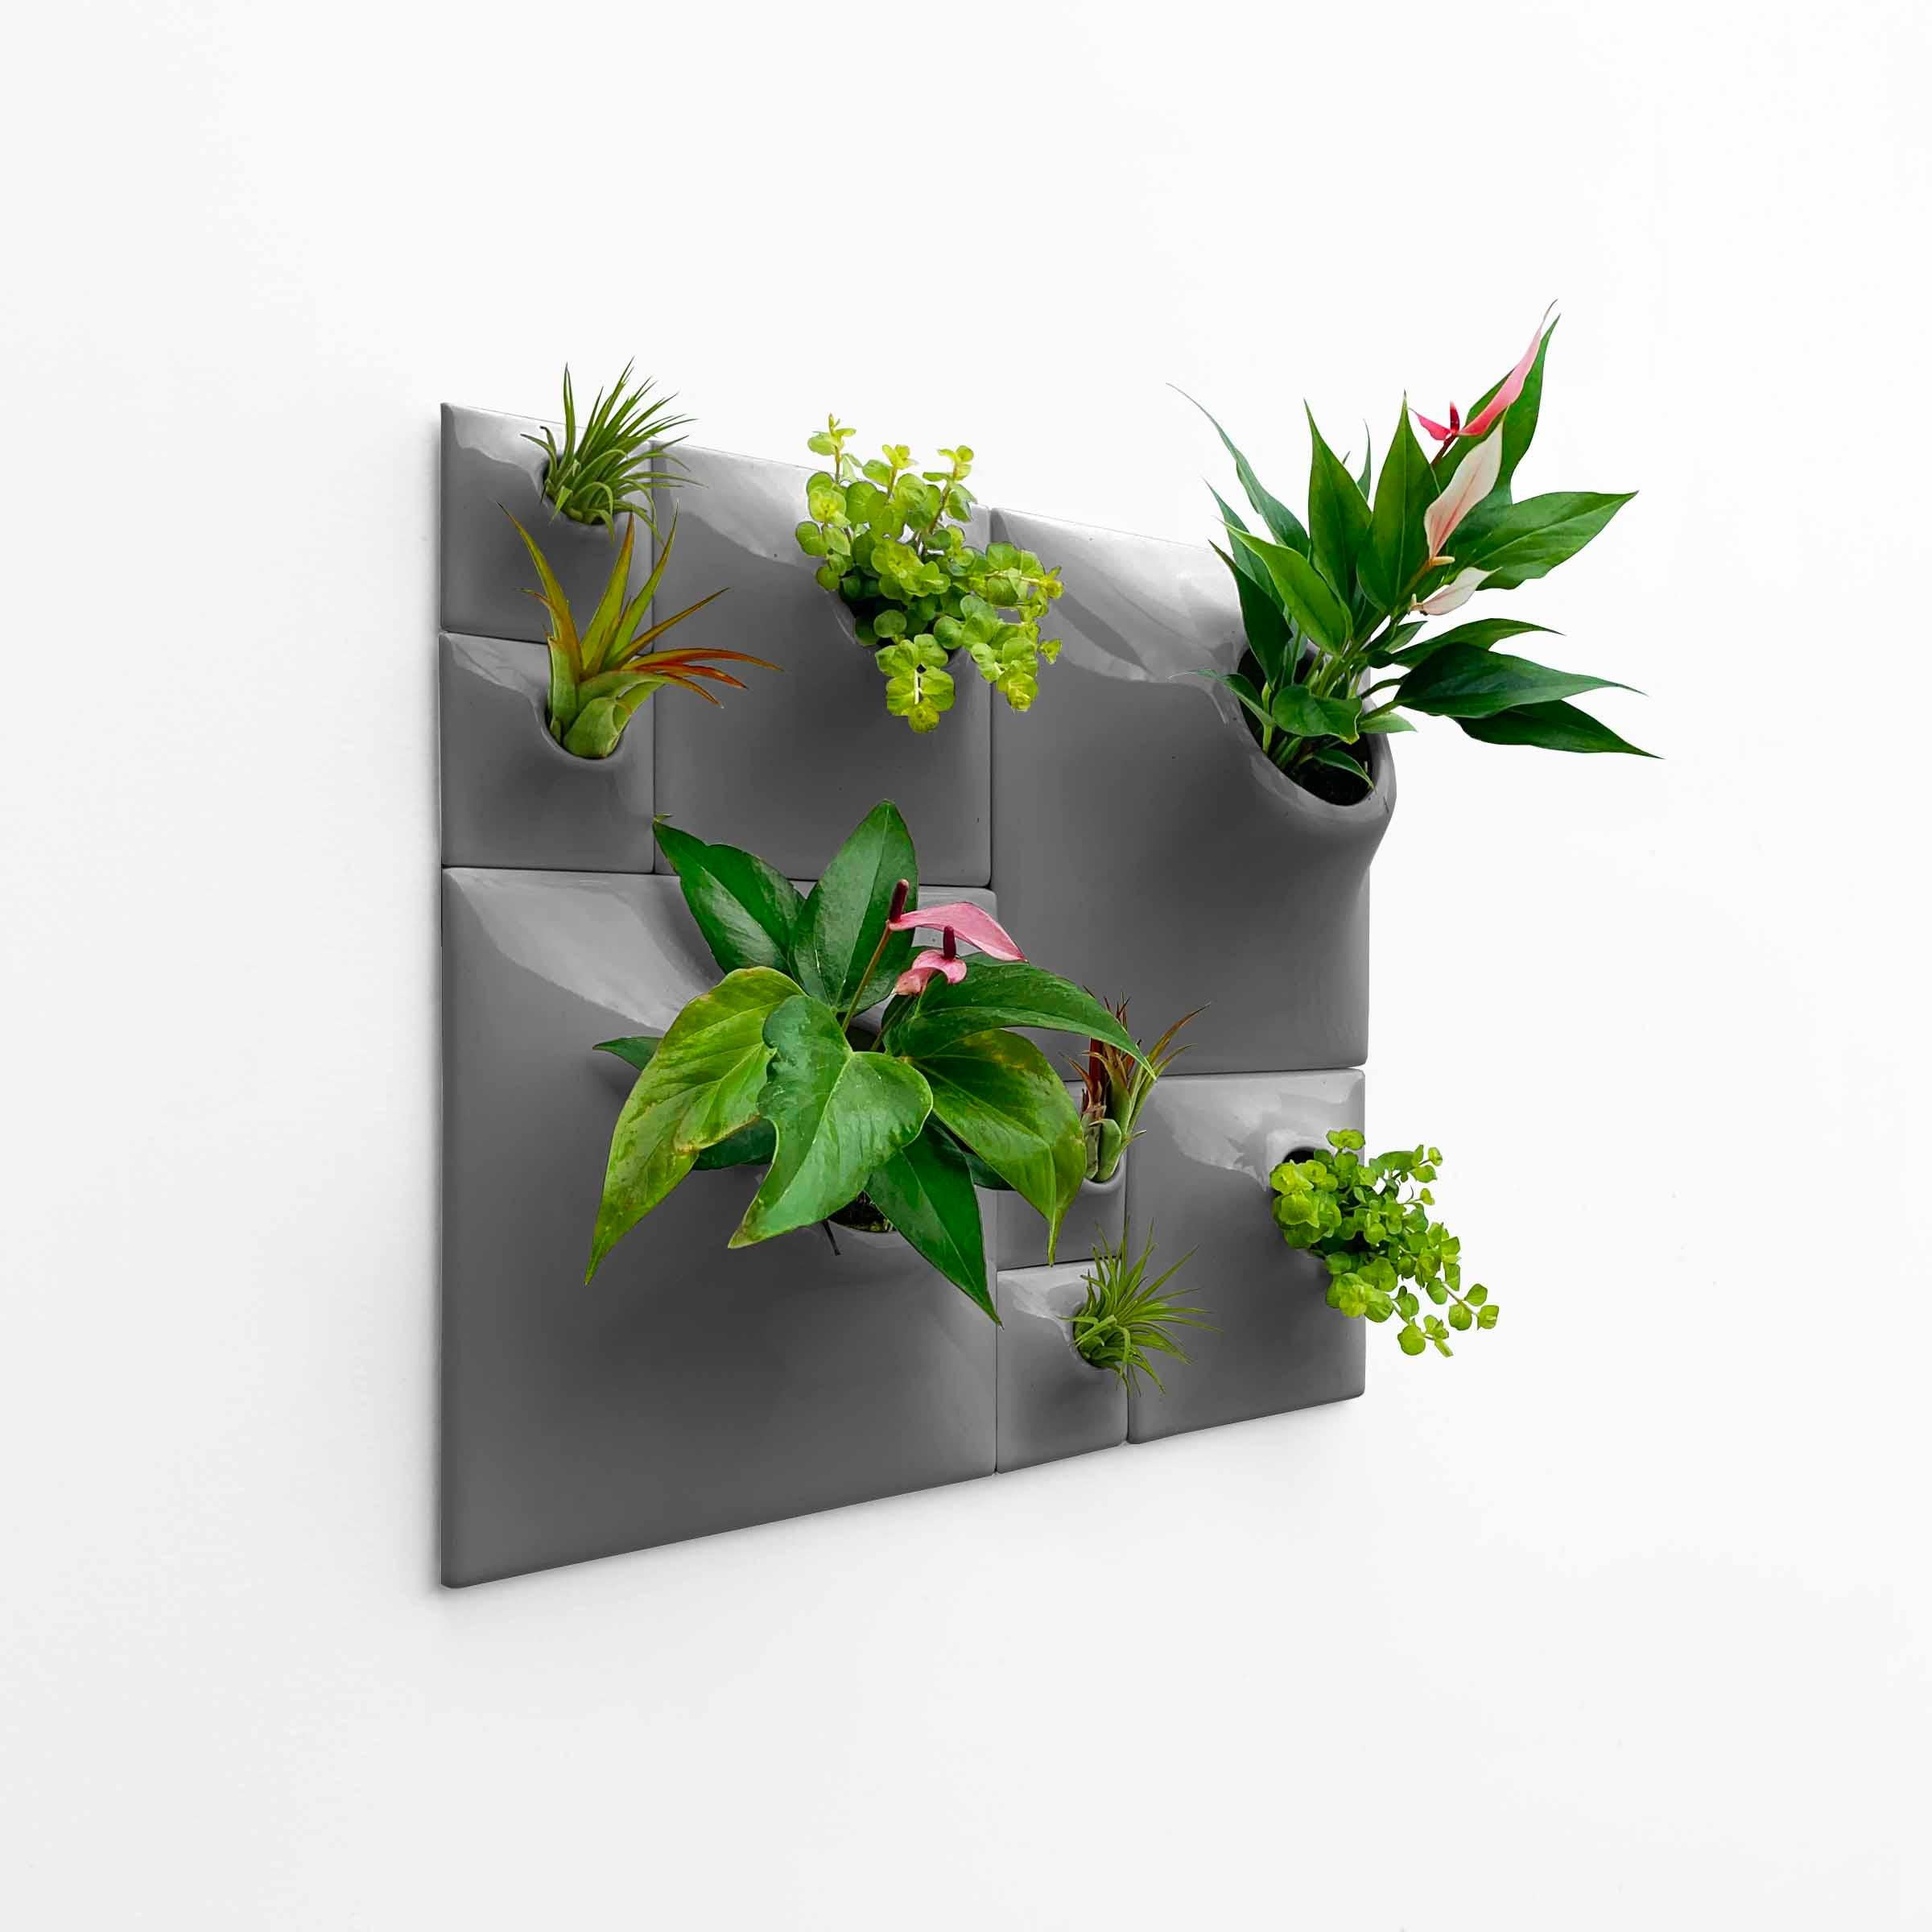 Modern Gray Wall Planter Set, Greenwall Sculpture, Living Wall Decor, Node BS2D

Reimagine your wall art as an awe-inspiring sculptural plant wall or moss wall in your modern home with this breathtaking Node Wall Planter set. Take your eyes on a